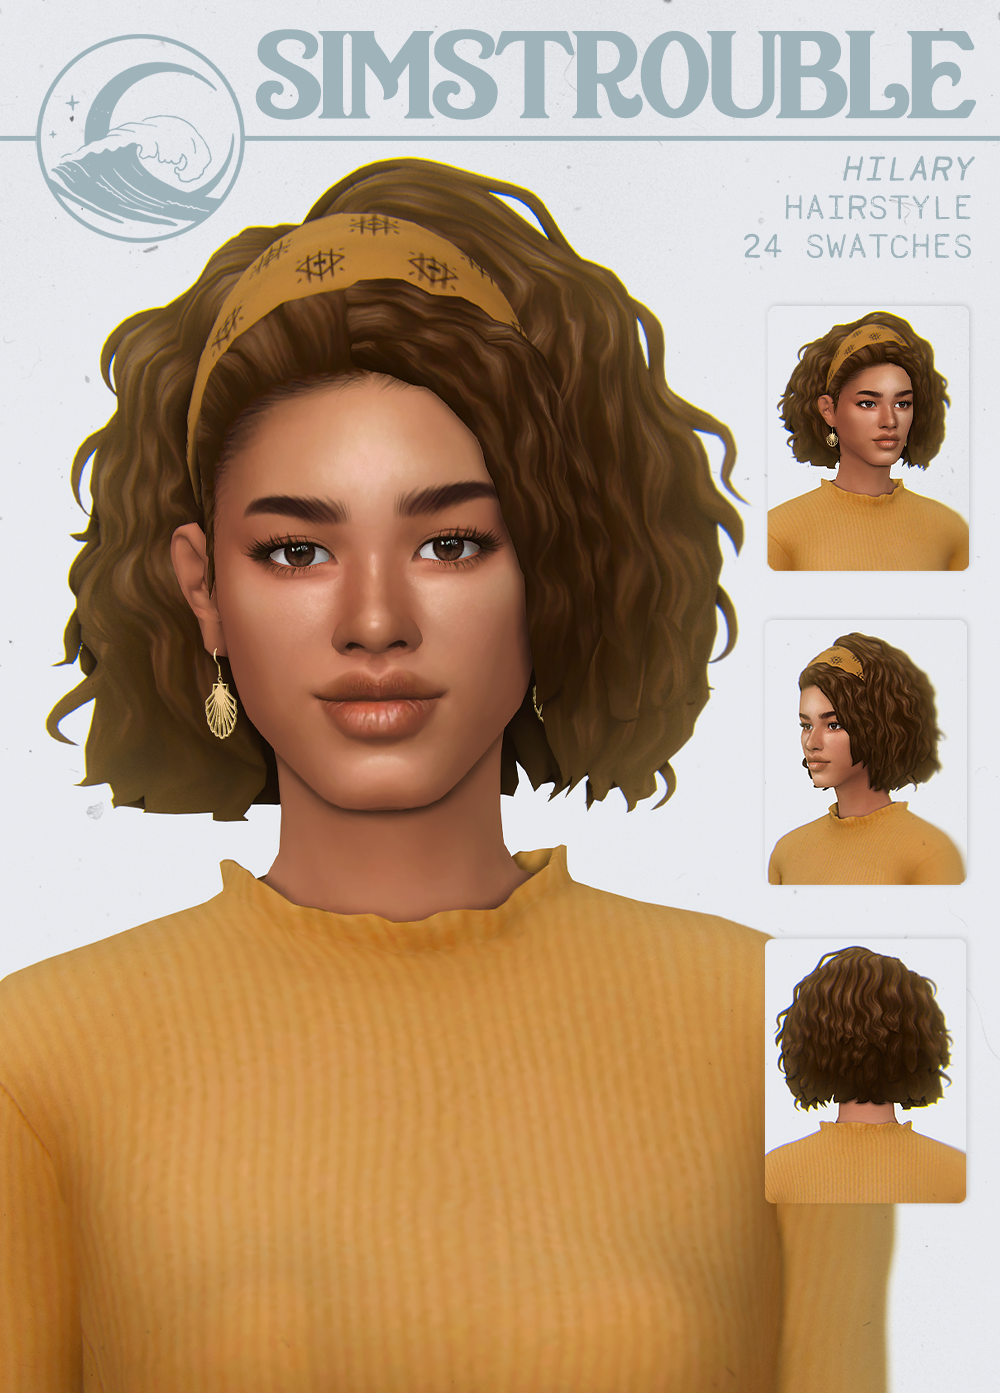 HILARY by simstrouble• Base Game Compatible
• 24 Swatches
• Accessory Headband Recolors from my Darlene Hairstyle included
•  All LODs, NOT Hat Compatible, All Maps, V1 10k poly / V2 8k poly
download (Patreon, free) | Instagram | Pinterest